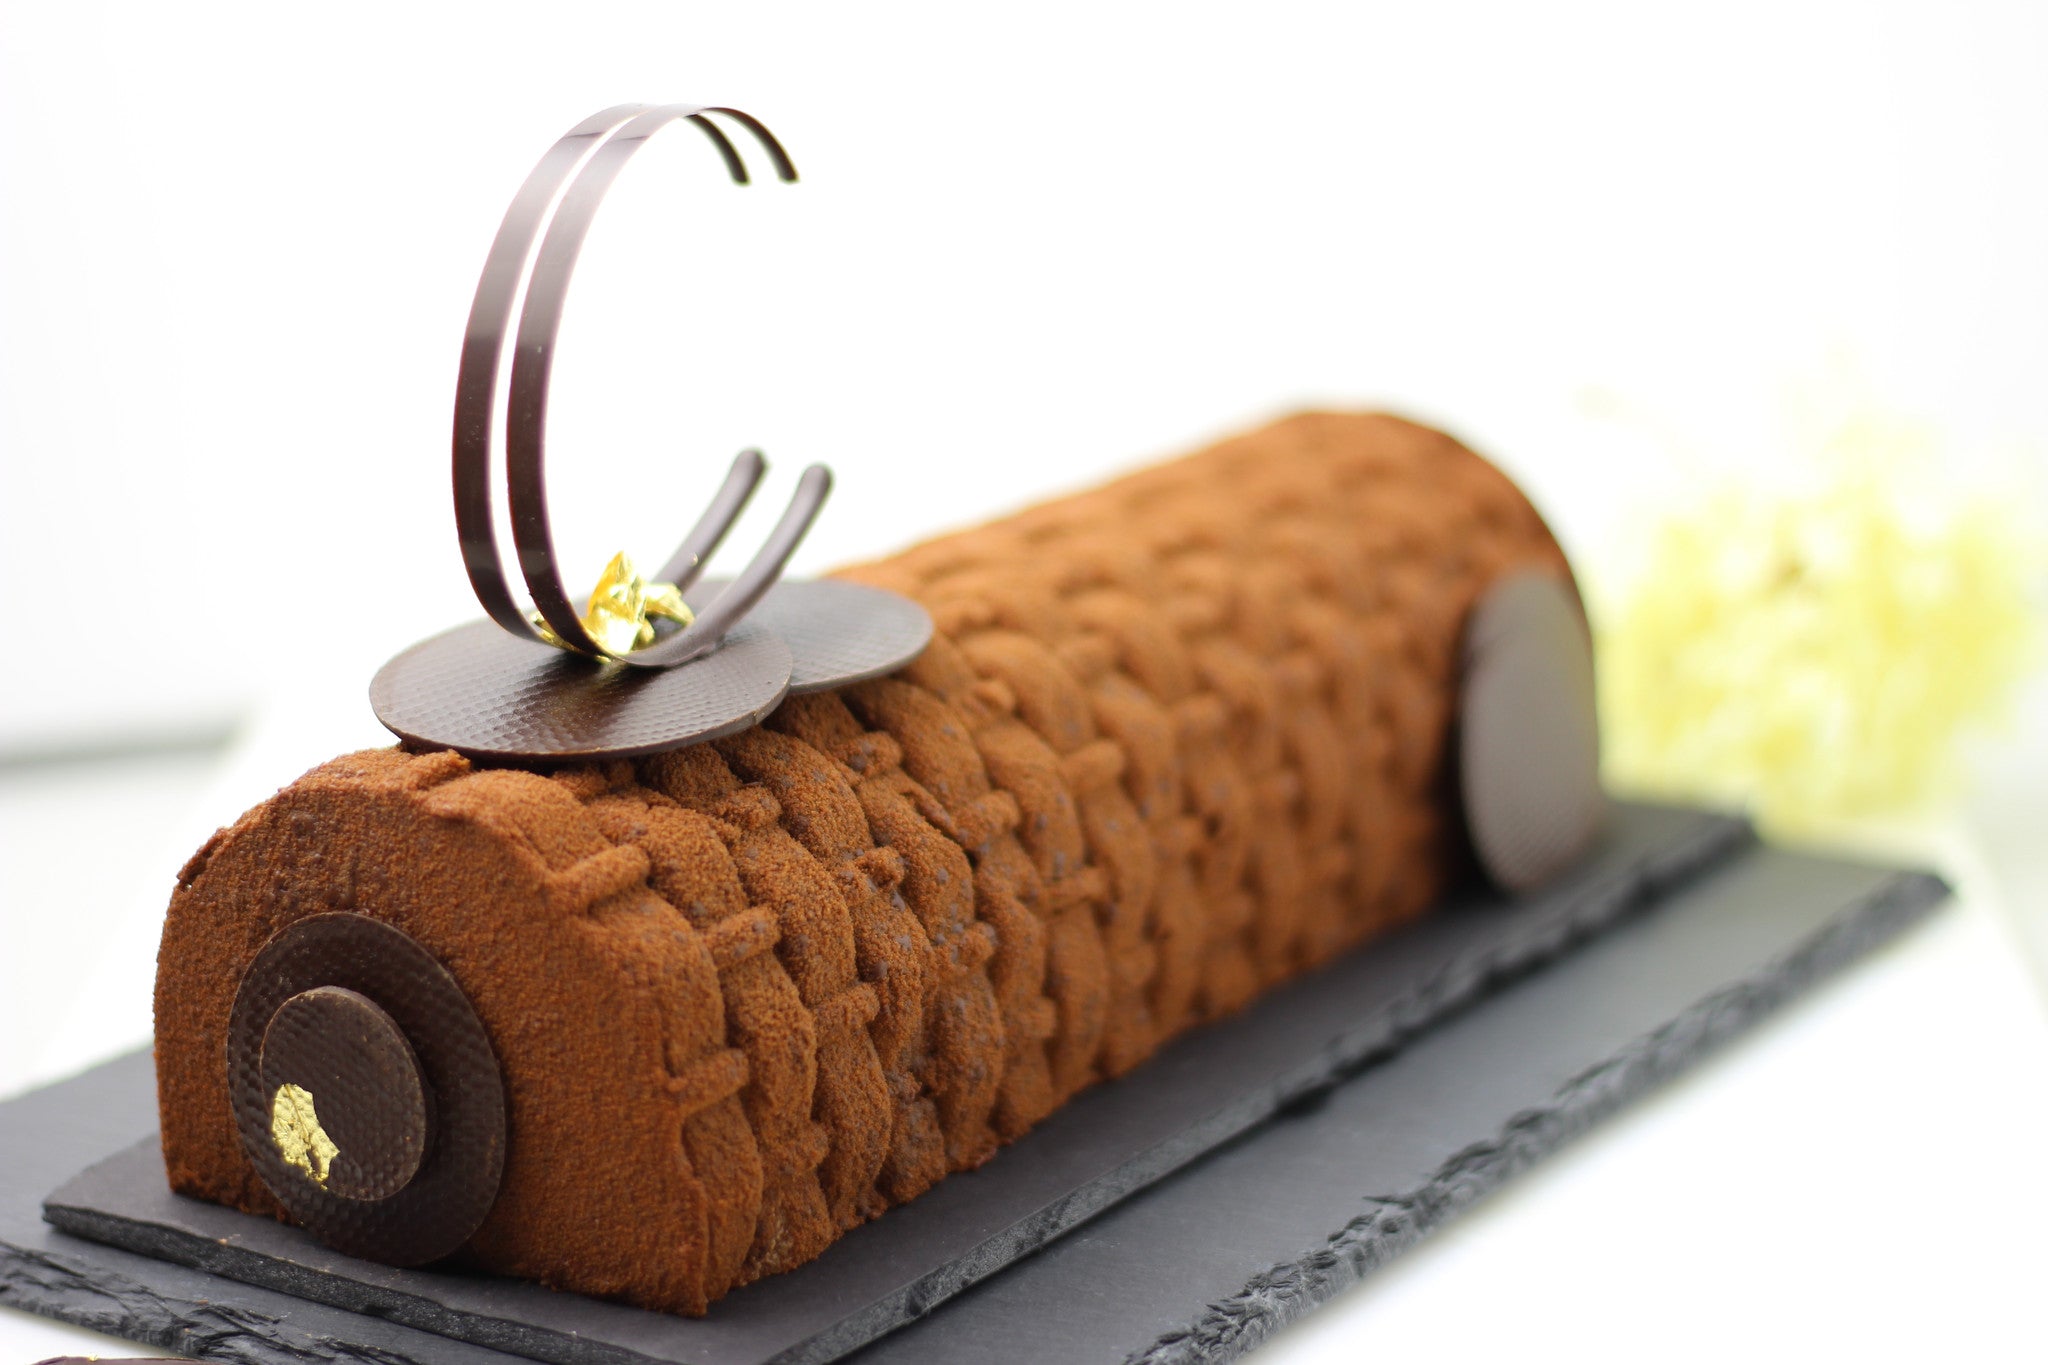 Classic Chocolate Yule Log Cake w/ Peanut Butter Mousse - Wry Toast